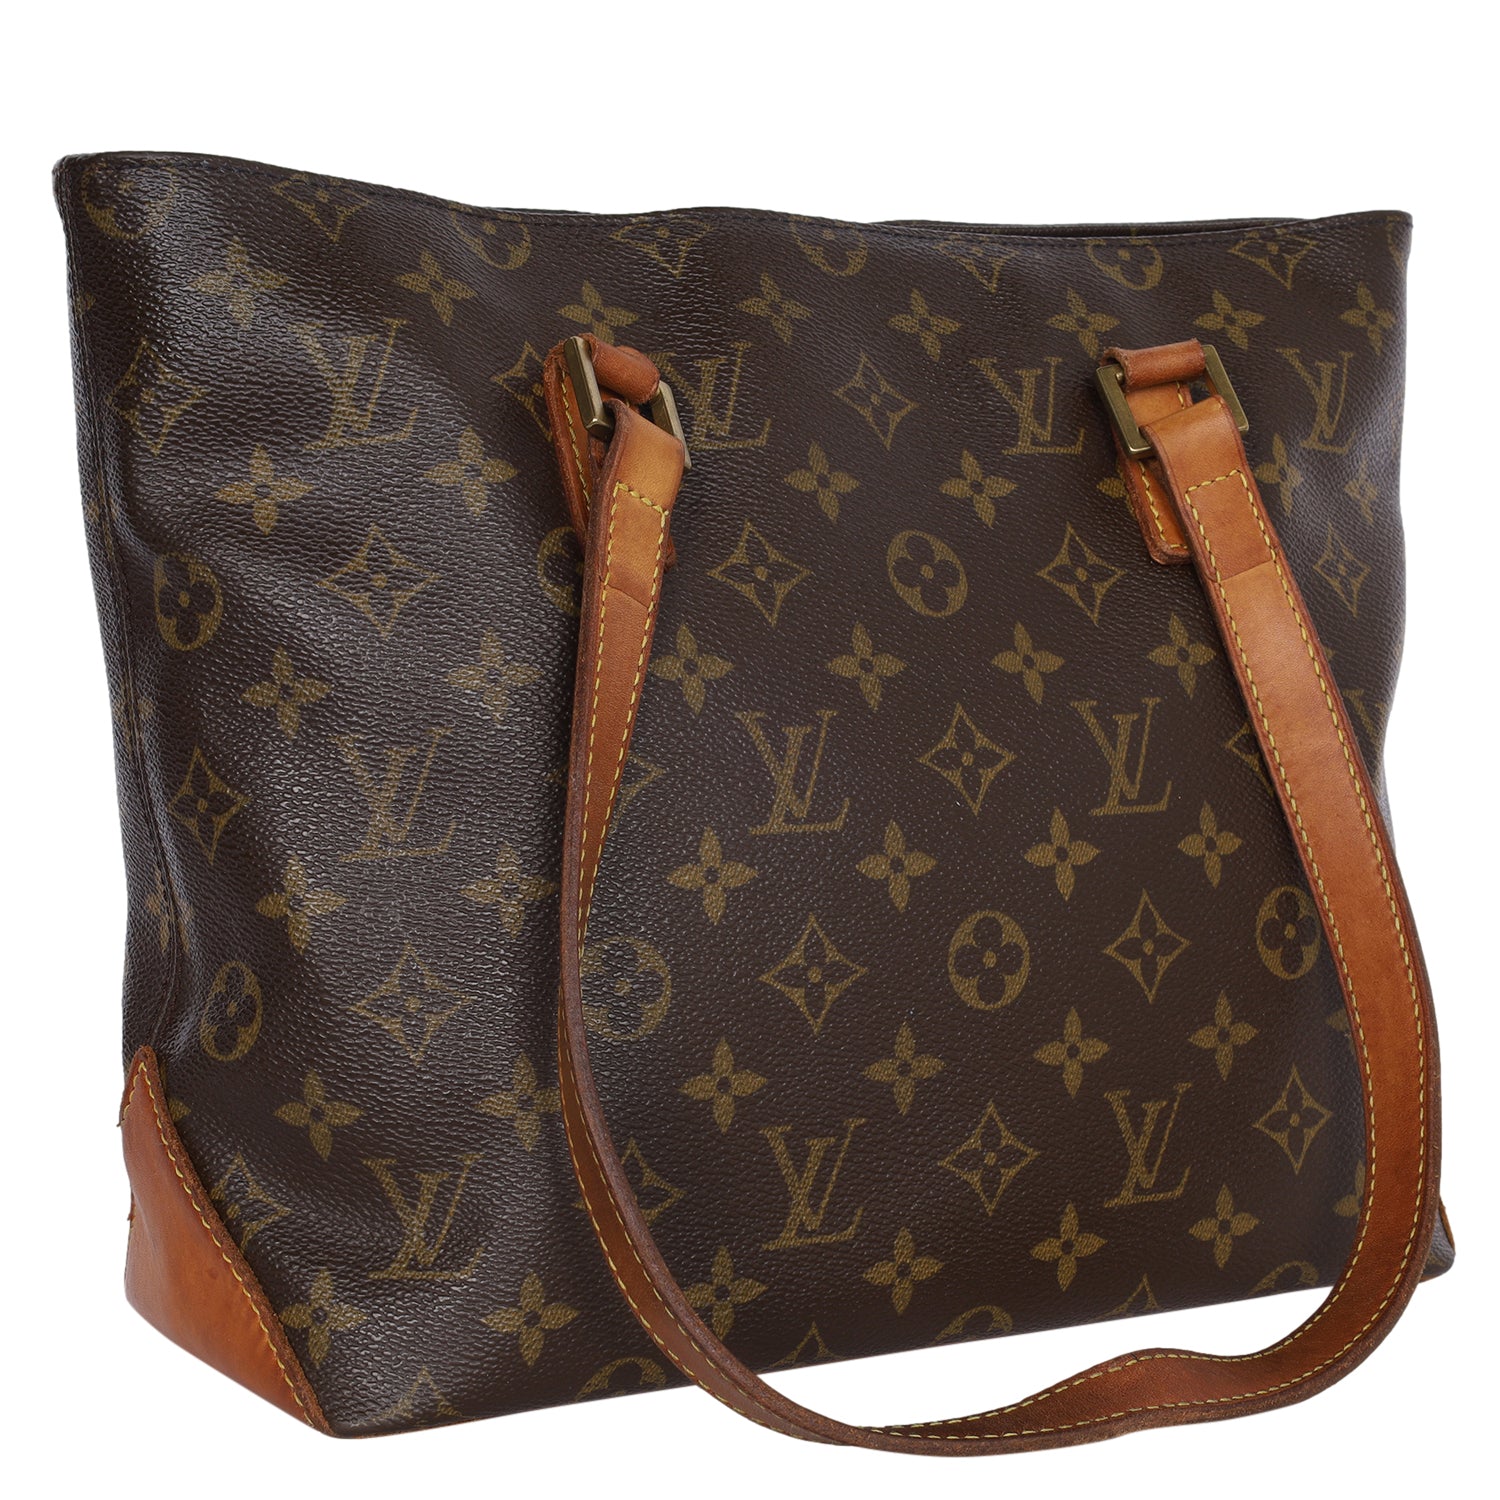 The Louis Vuitton Cabas Puano is the perfect bag to het get yiu in